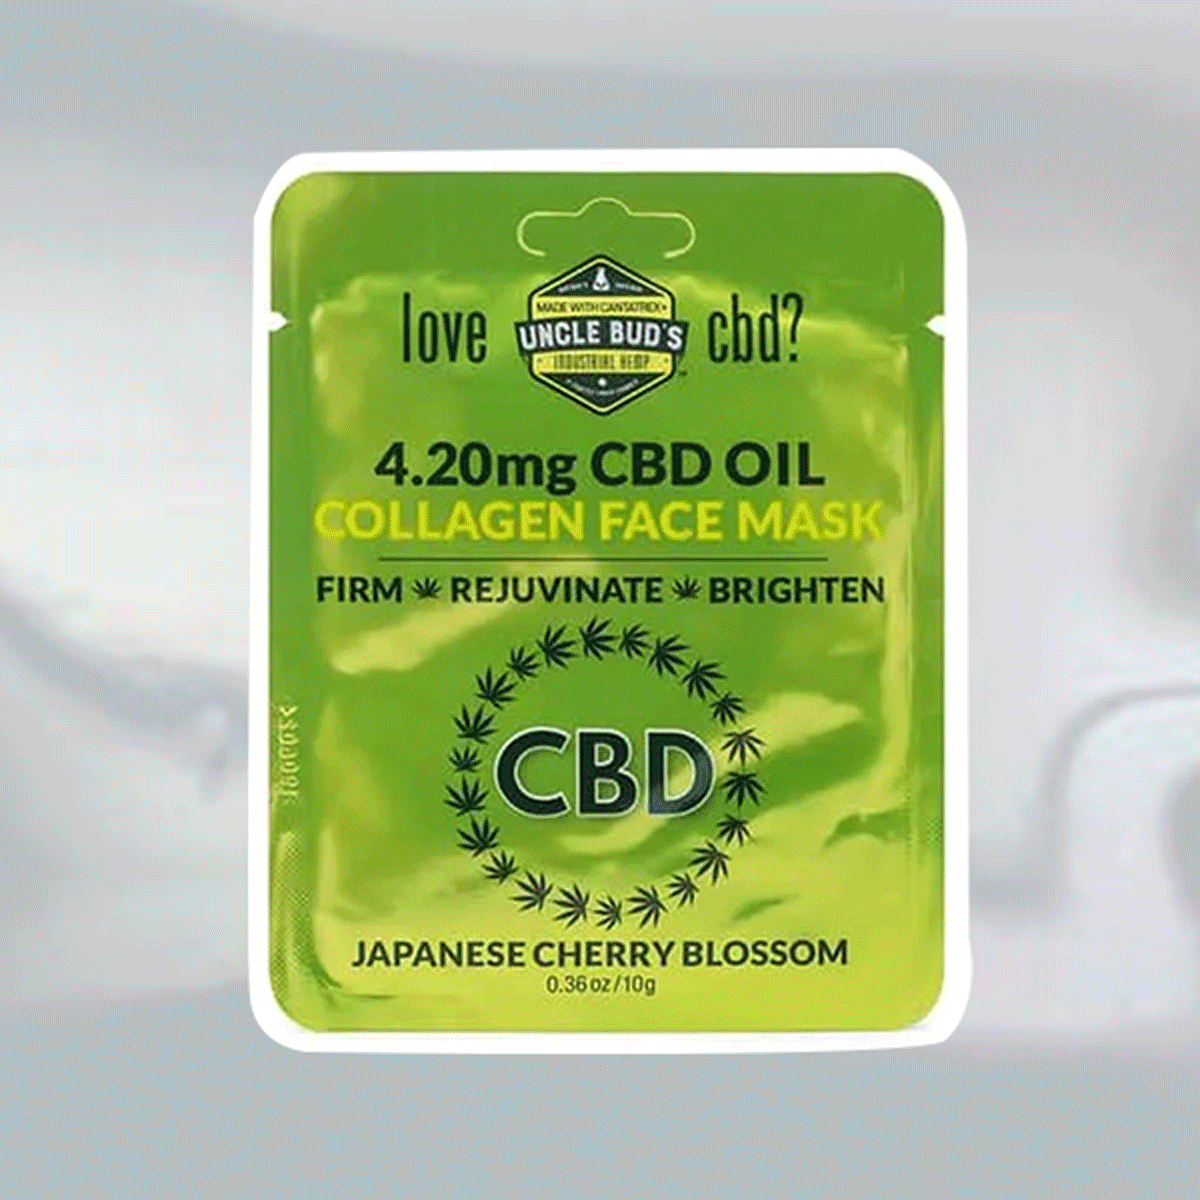 10 CBD Products to Use Right Now